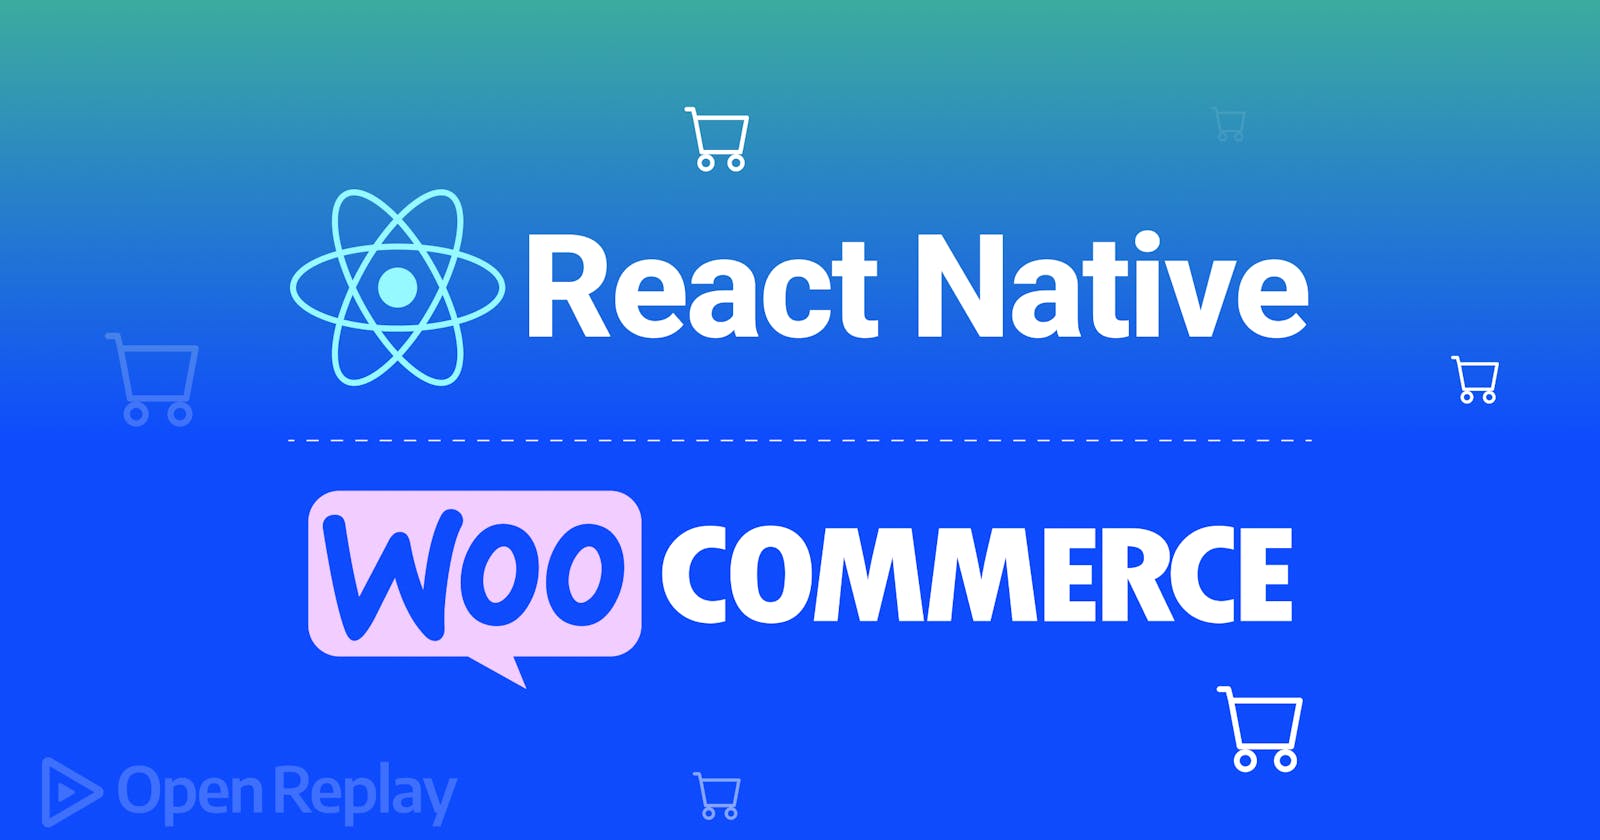 Building An ECommerce Mobile App With React Native And WooCommerce